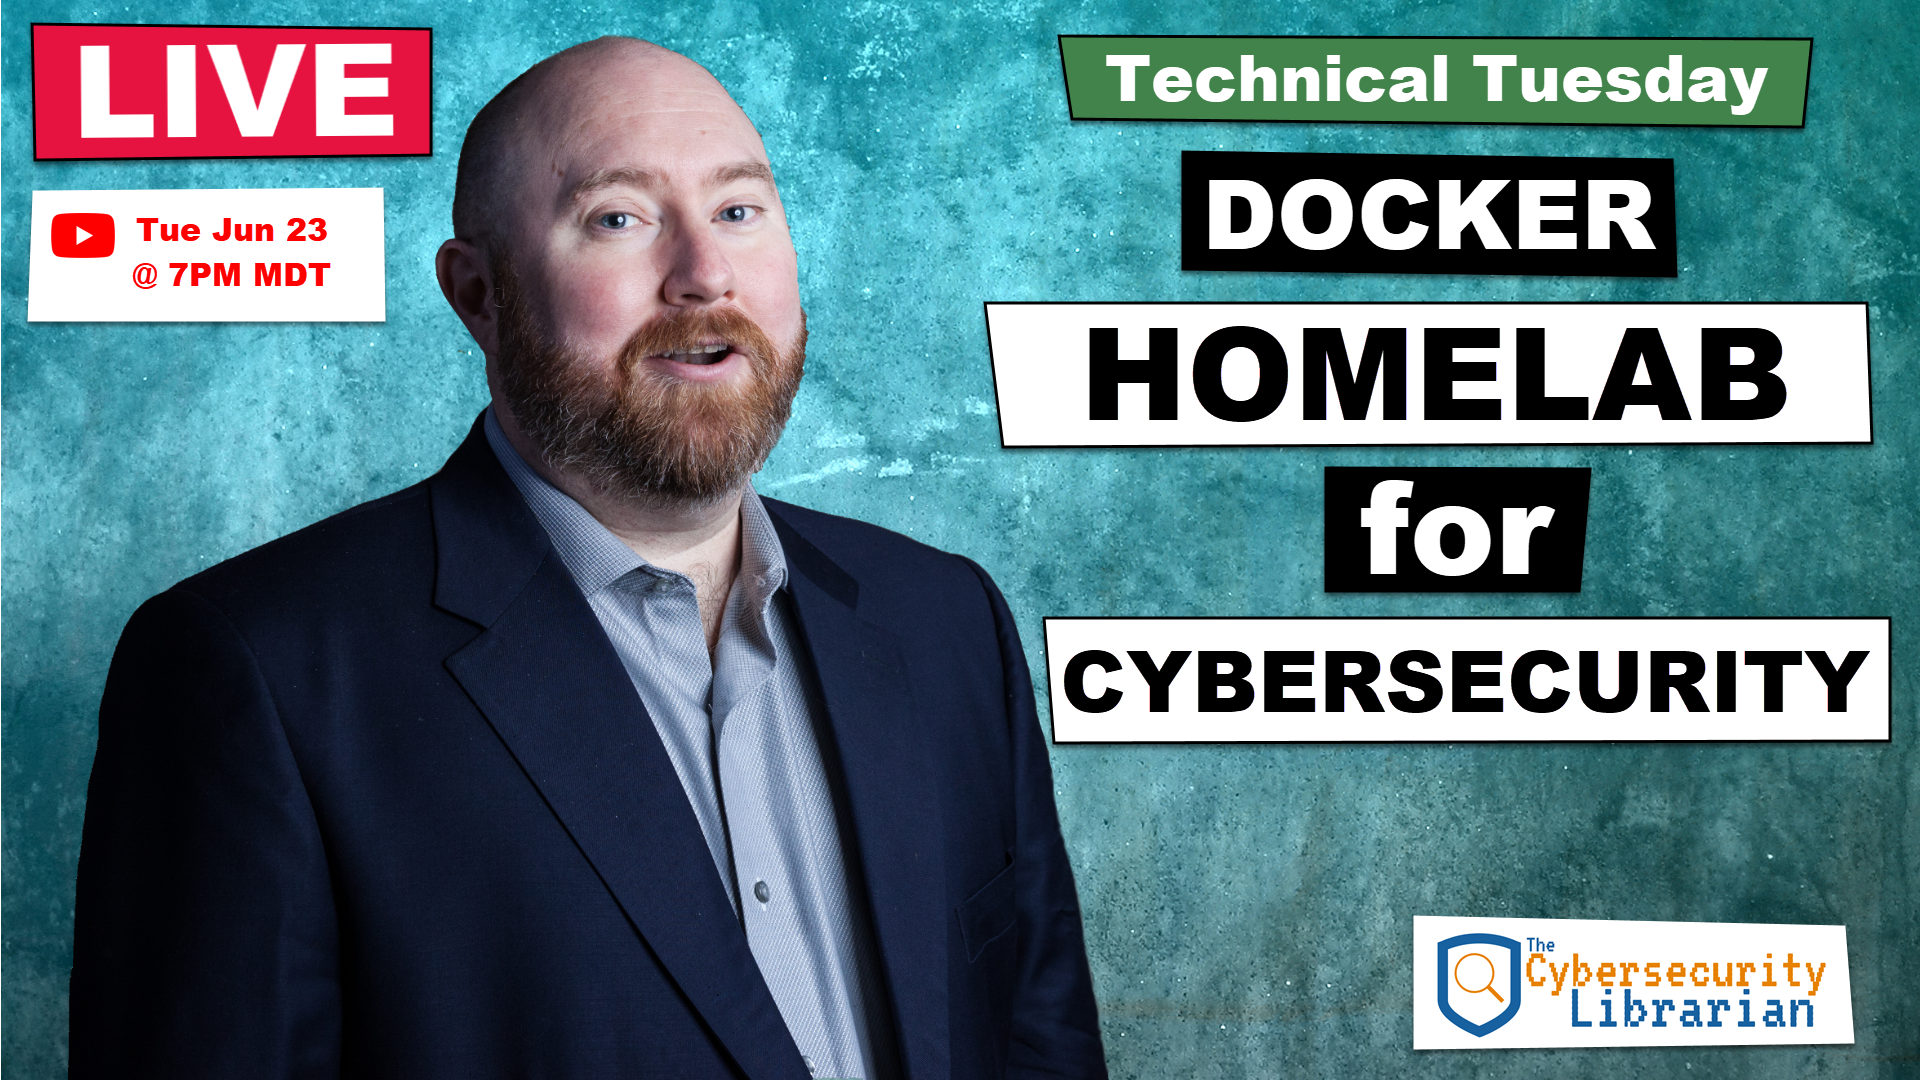 thumbnail for Docker Homelab for Cybersecurity youtube video